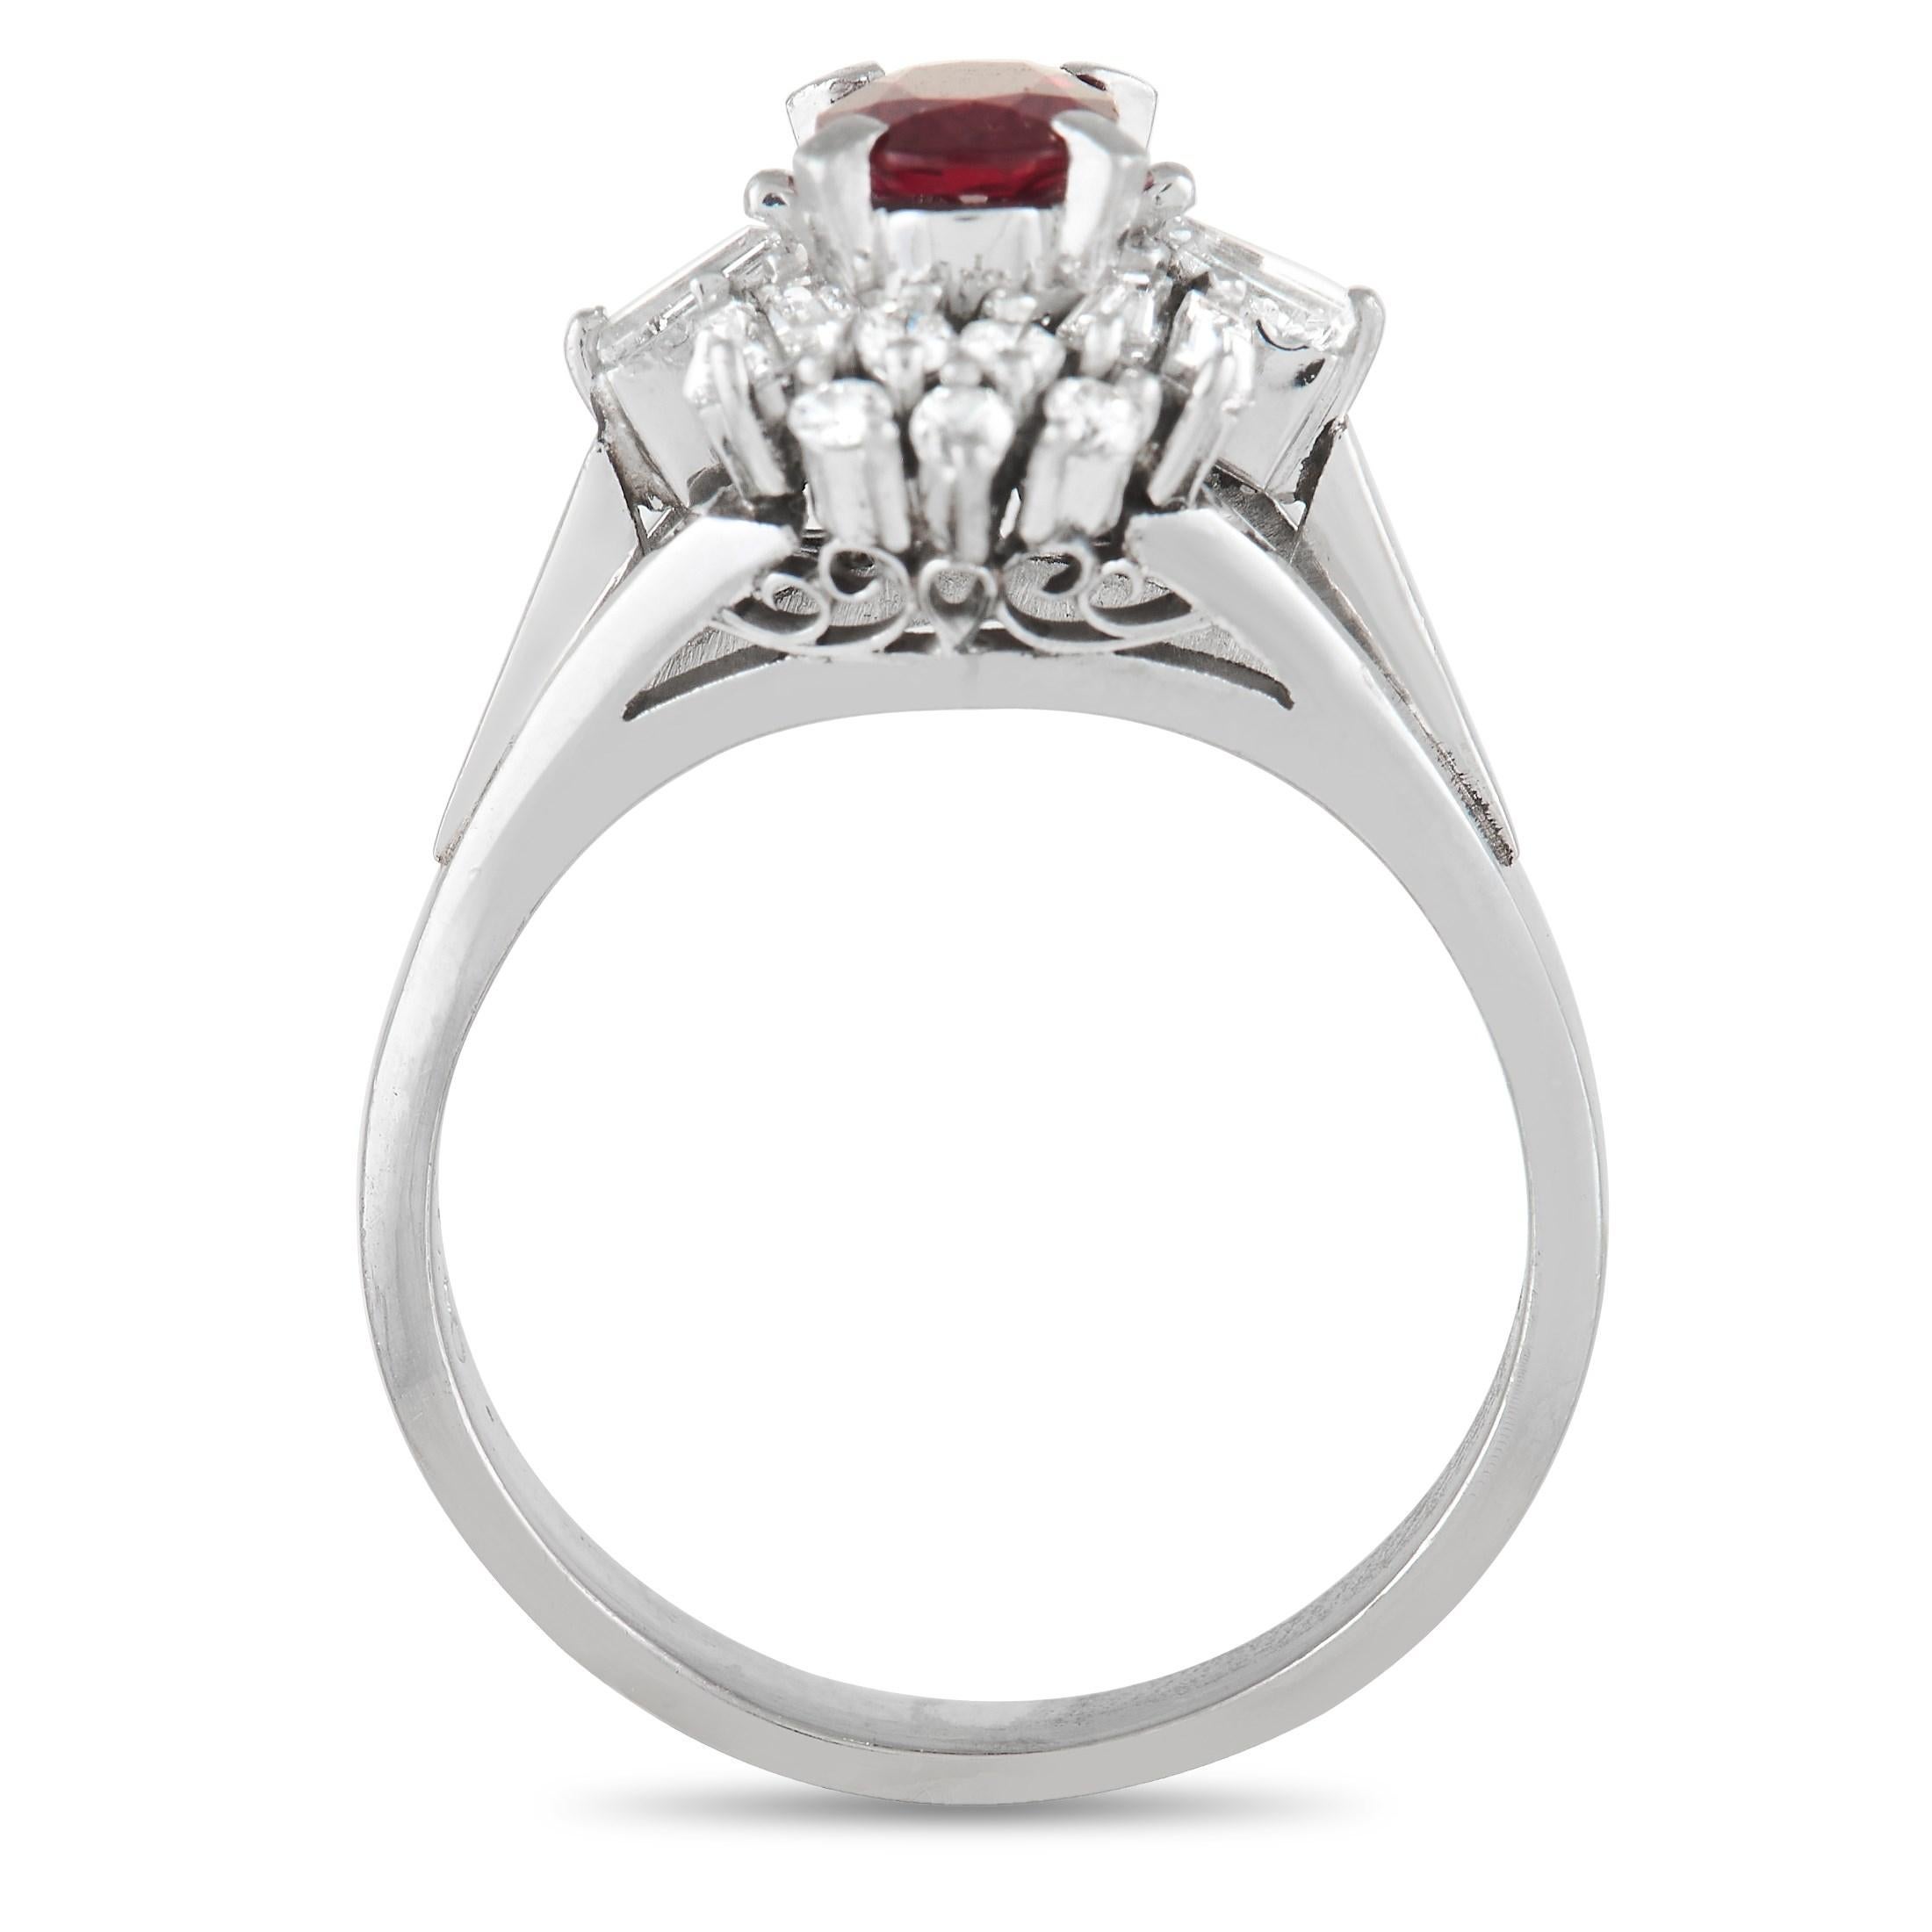 A deep red 0.68 carat ruby gemstone provides a captivating focal point at the center of this impeccably designed ring. Along with a shimmering platinum setting, this radiant design also includes a creative arrangement of diamonds that possess a